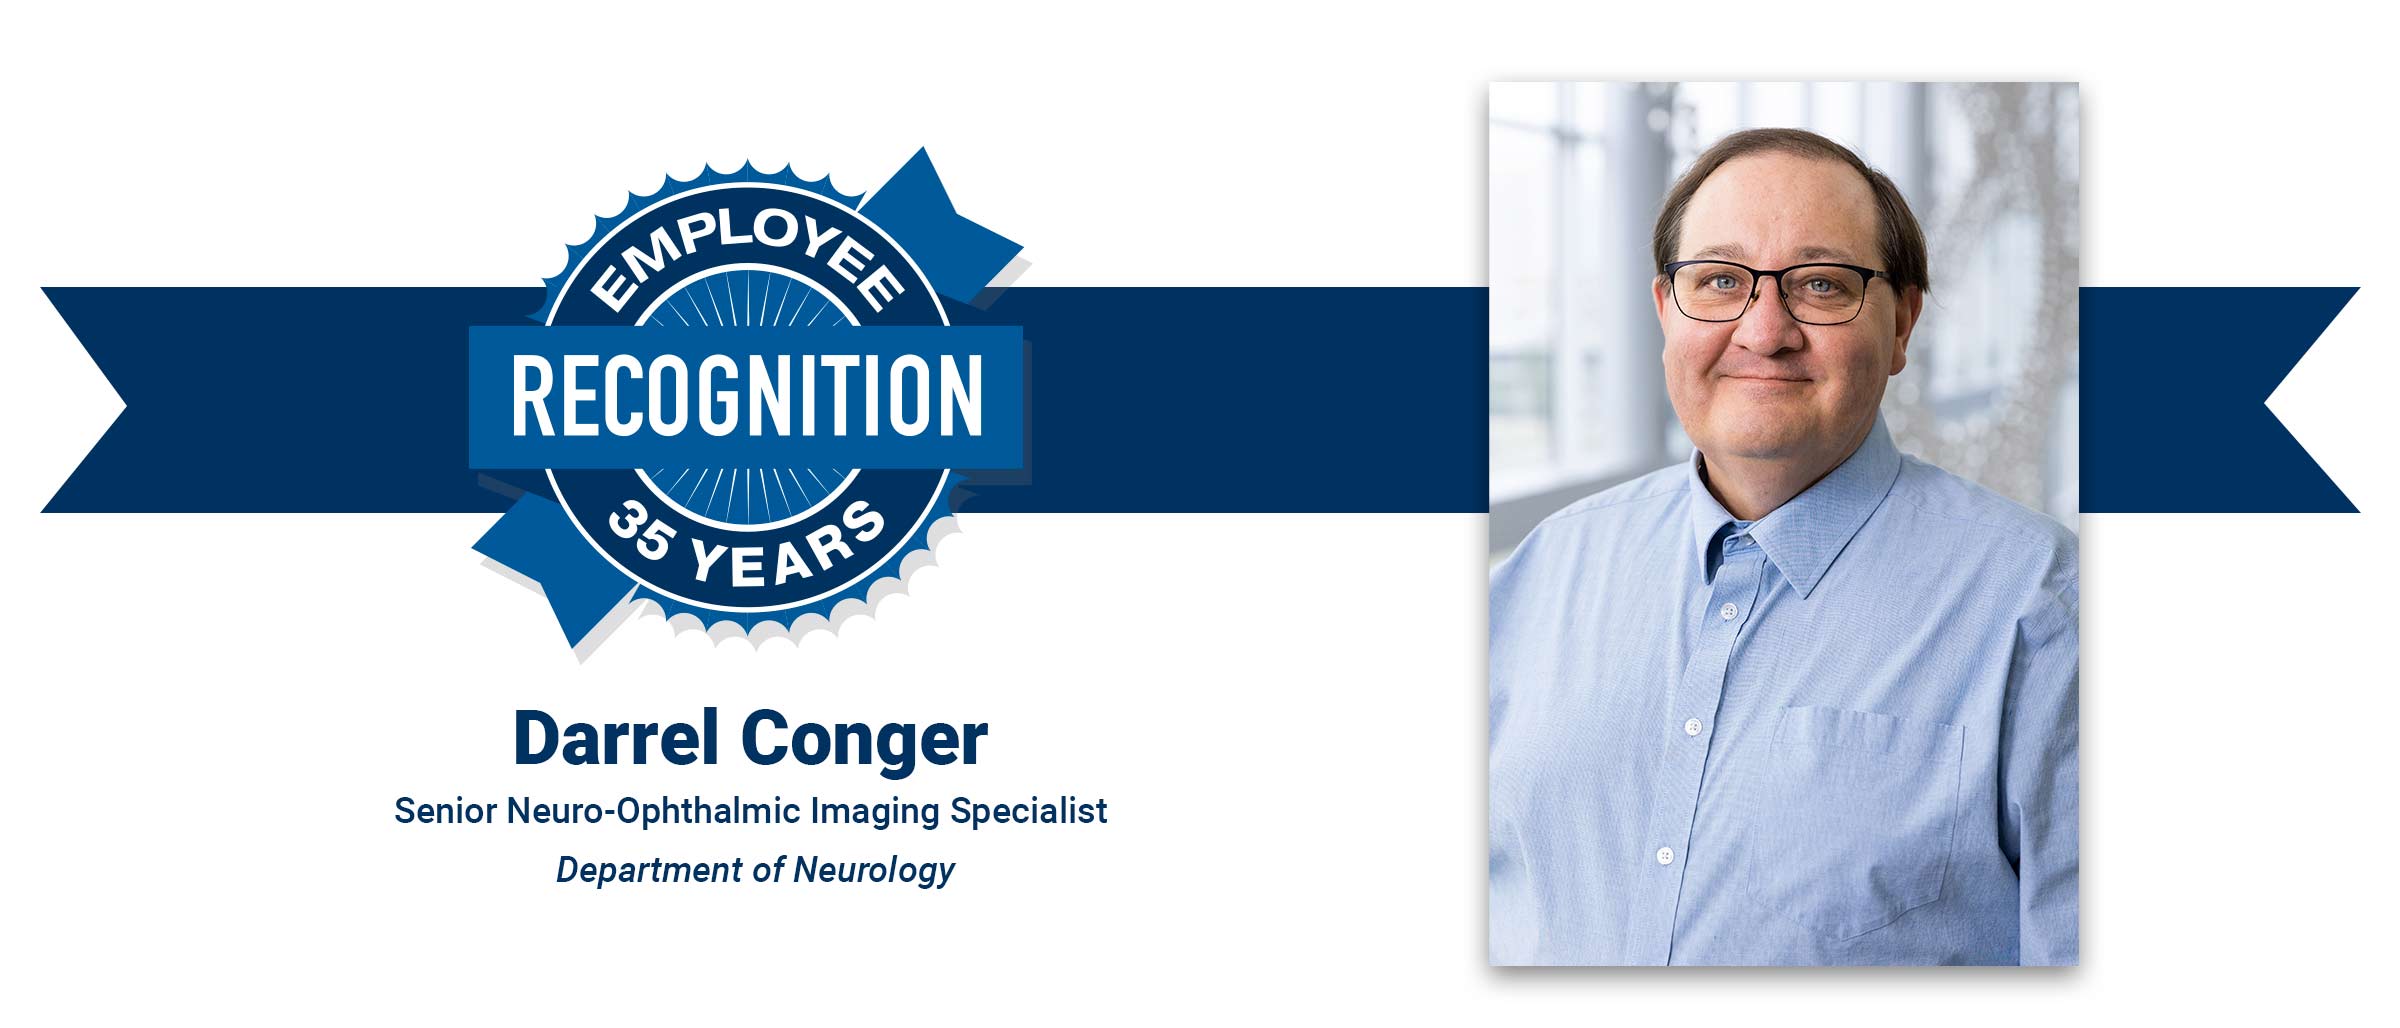 Man with brown hair, thin black glasses, blue collared button shirt. Darrel Conger, 35 years employee recognition.